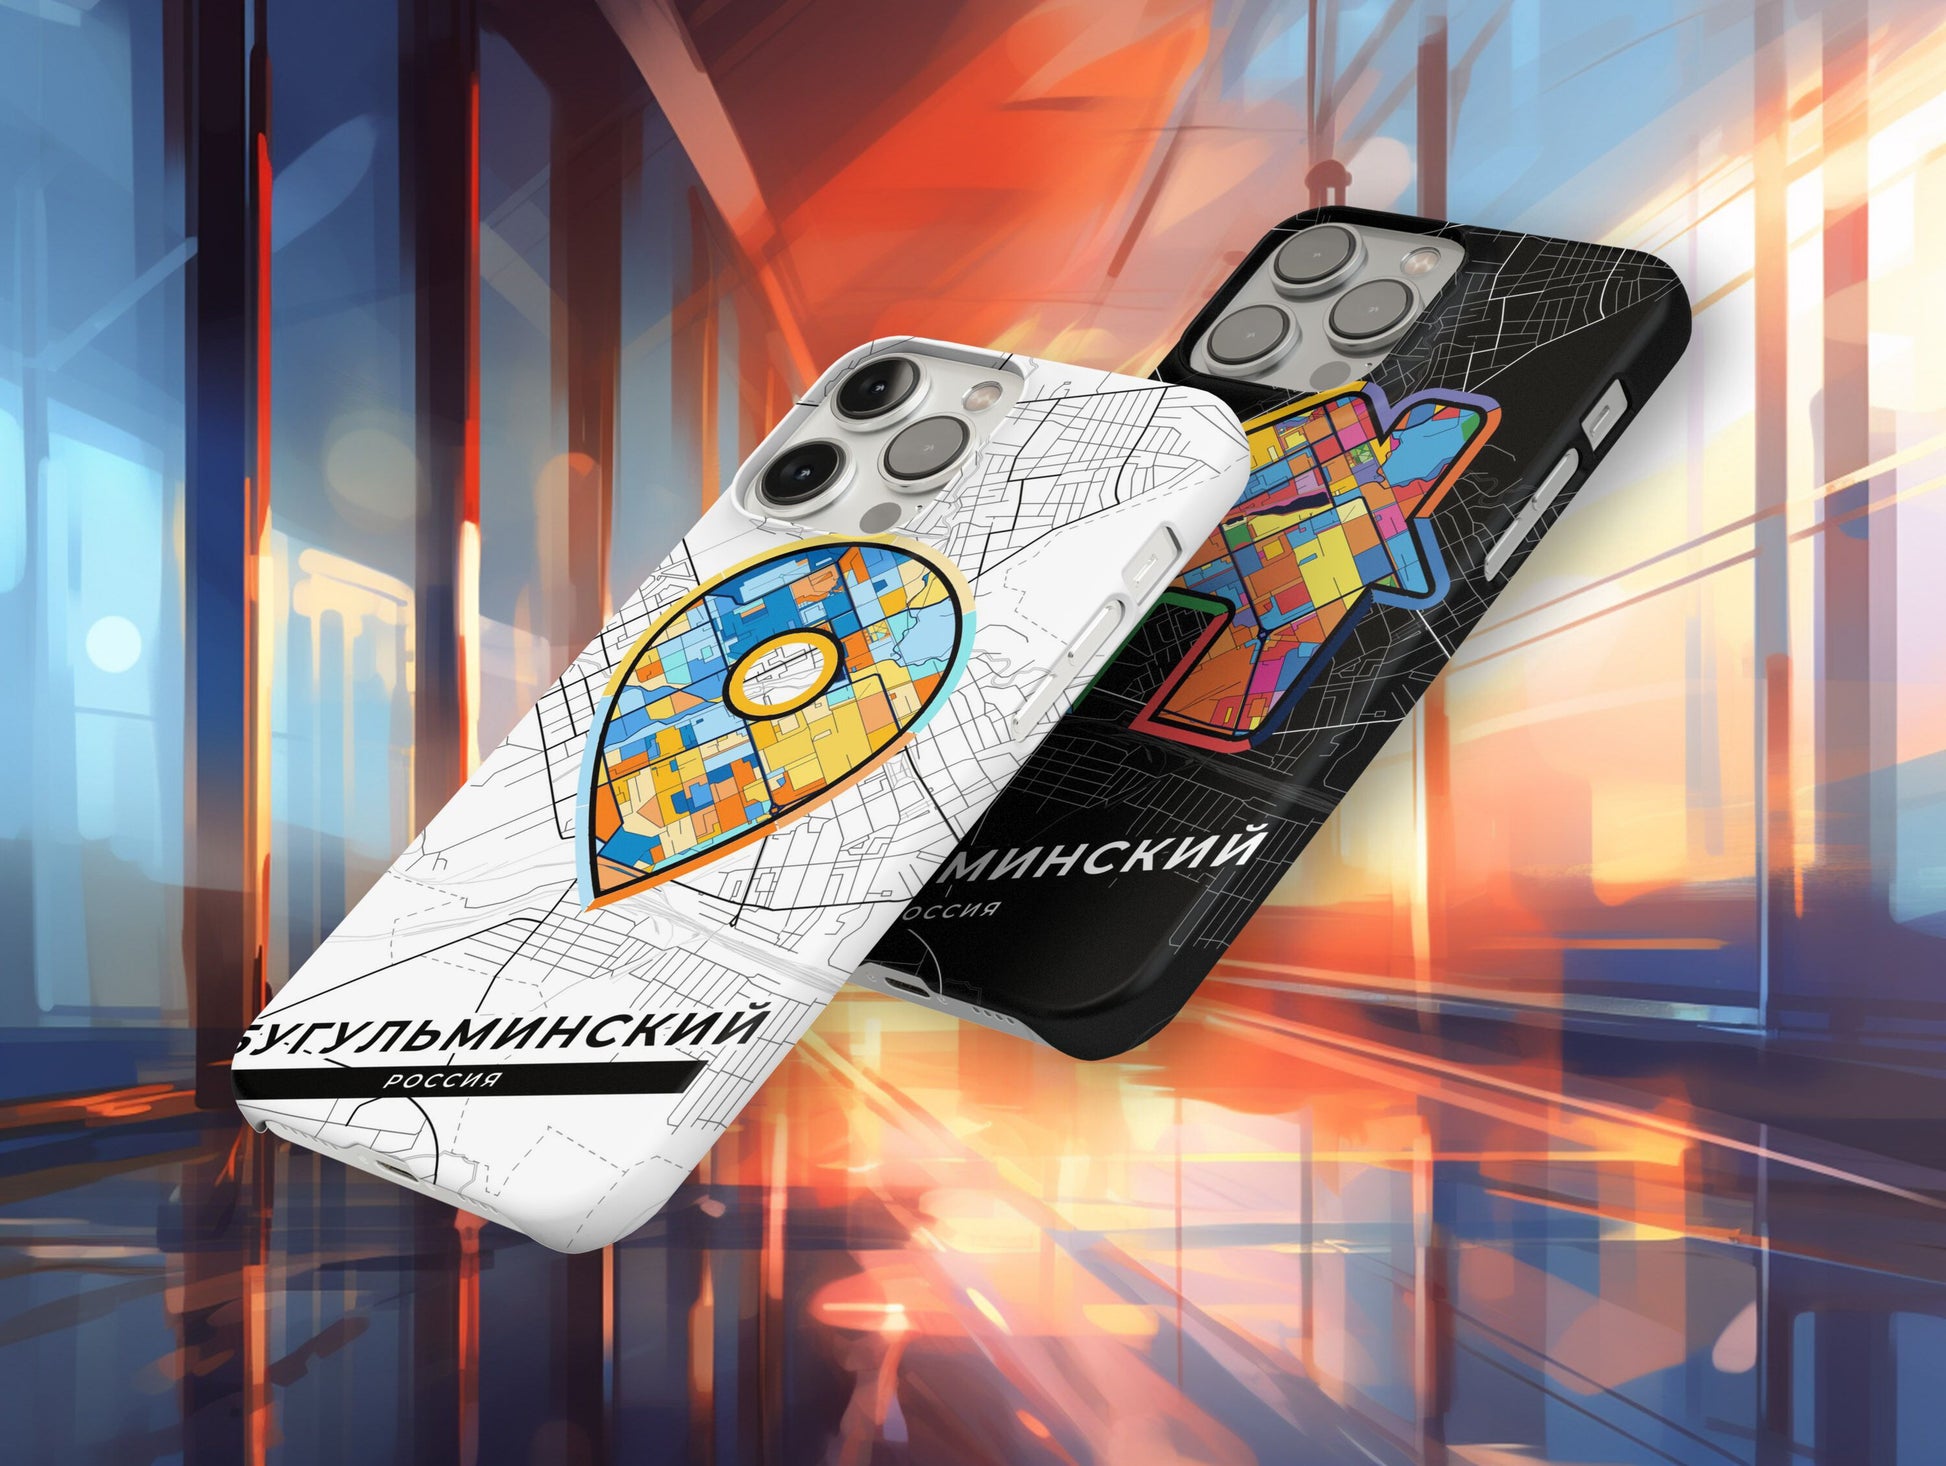 Bugulma Russia slim phone case with colorful icon. Birthday, wedding or housewarming gift. Couple match cases.